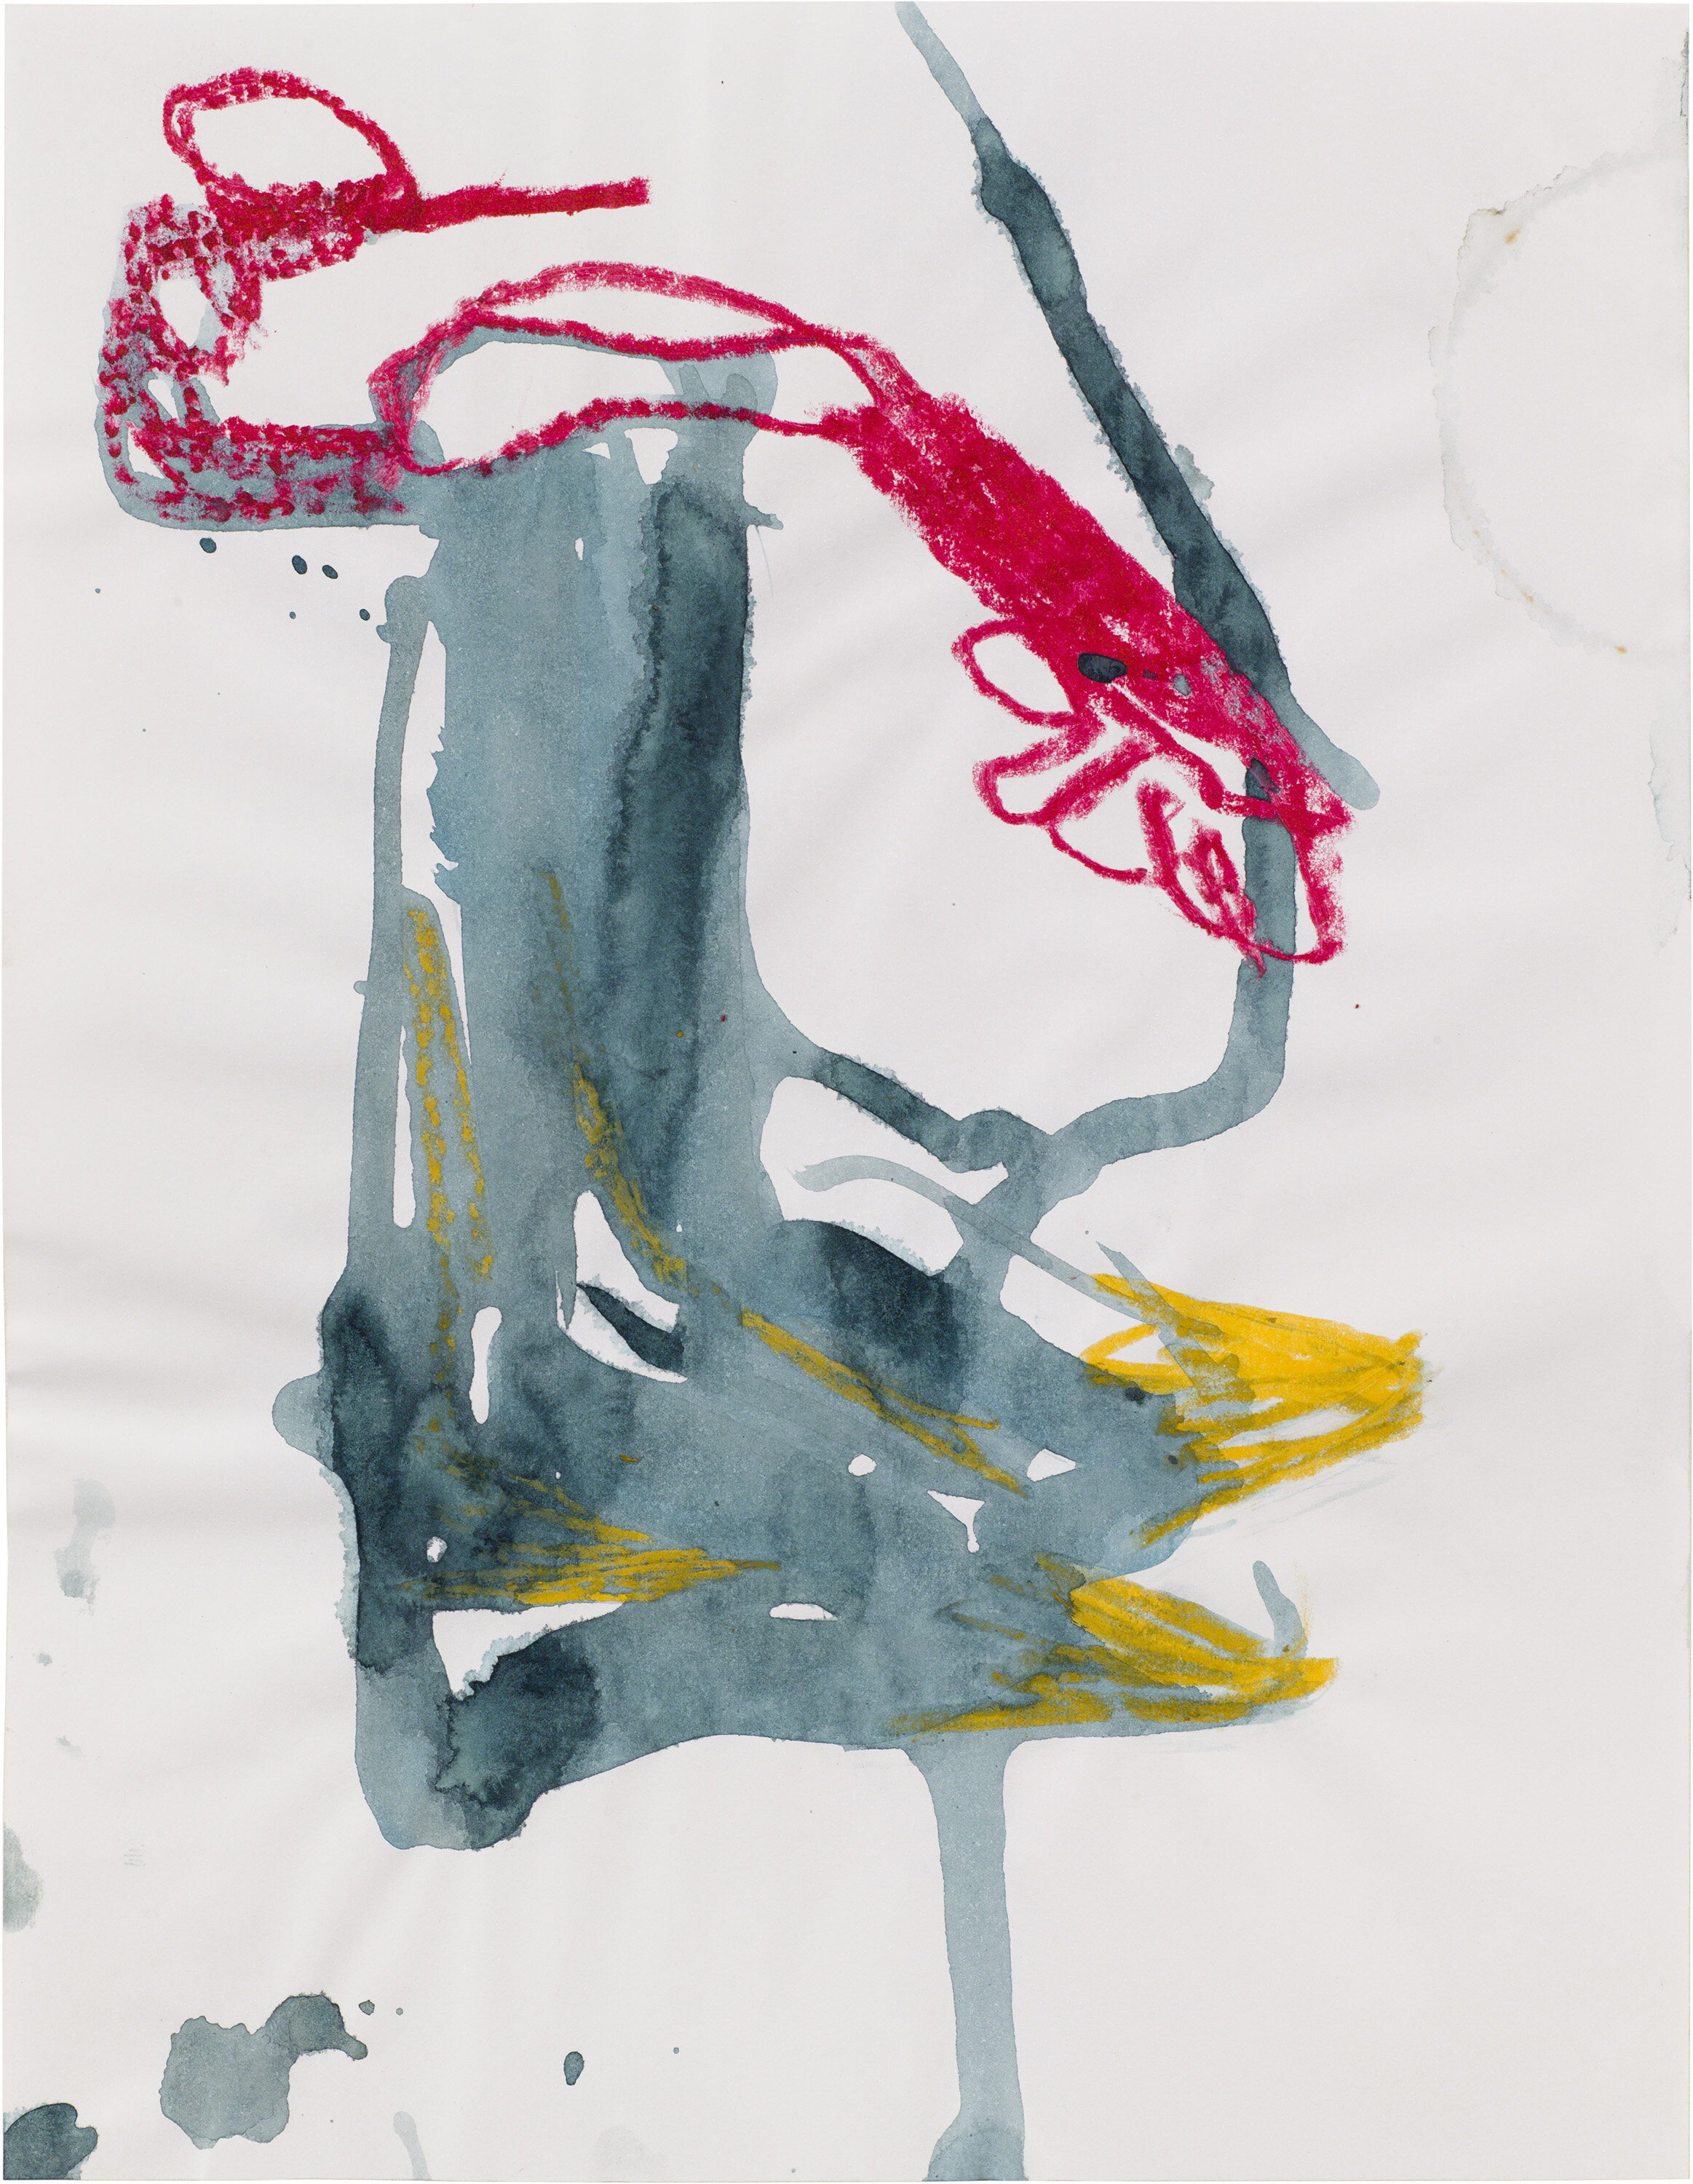  Drew Beattie and Ben Shepard   DBBS-DRW-2013-050   2013  acrylic and oil stick on paper  11 x 8.5 inches 